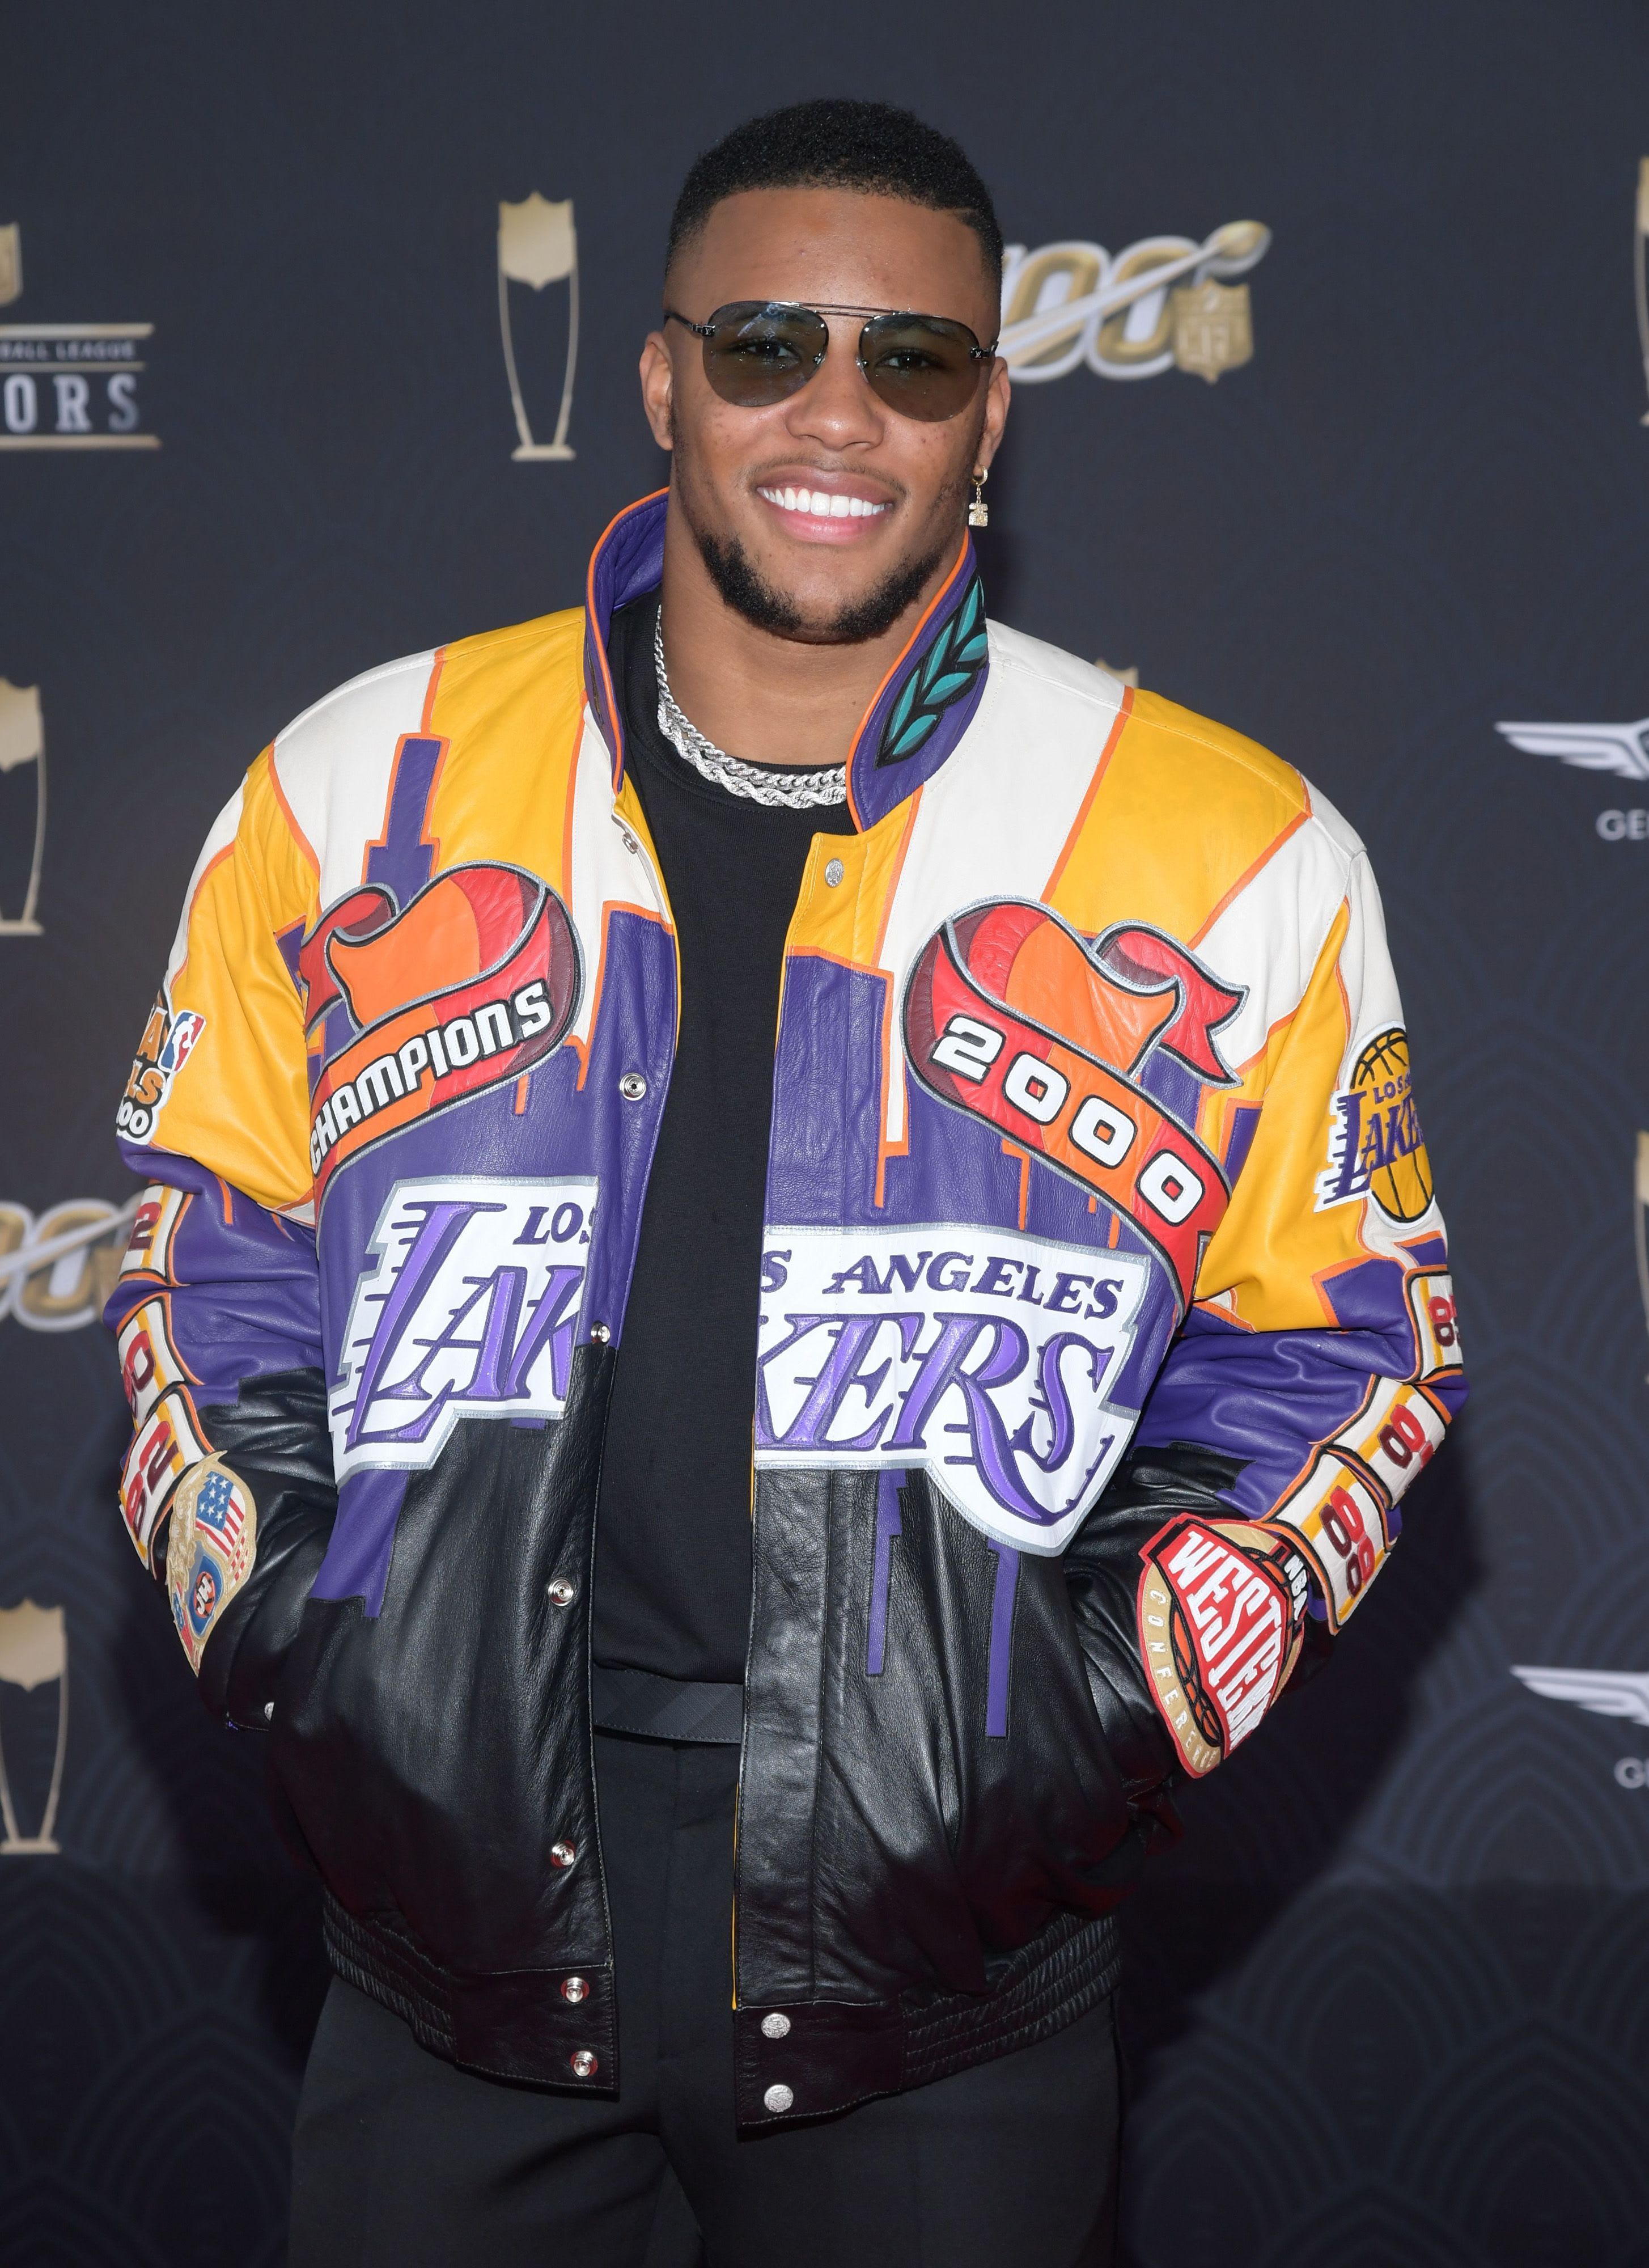 lakers jacket outfit